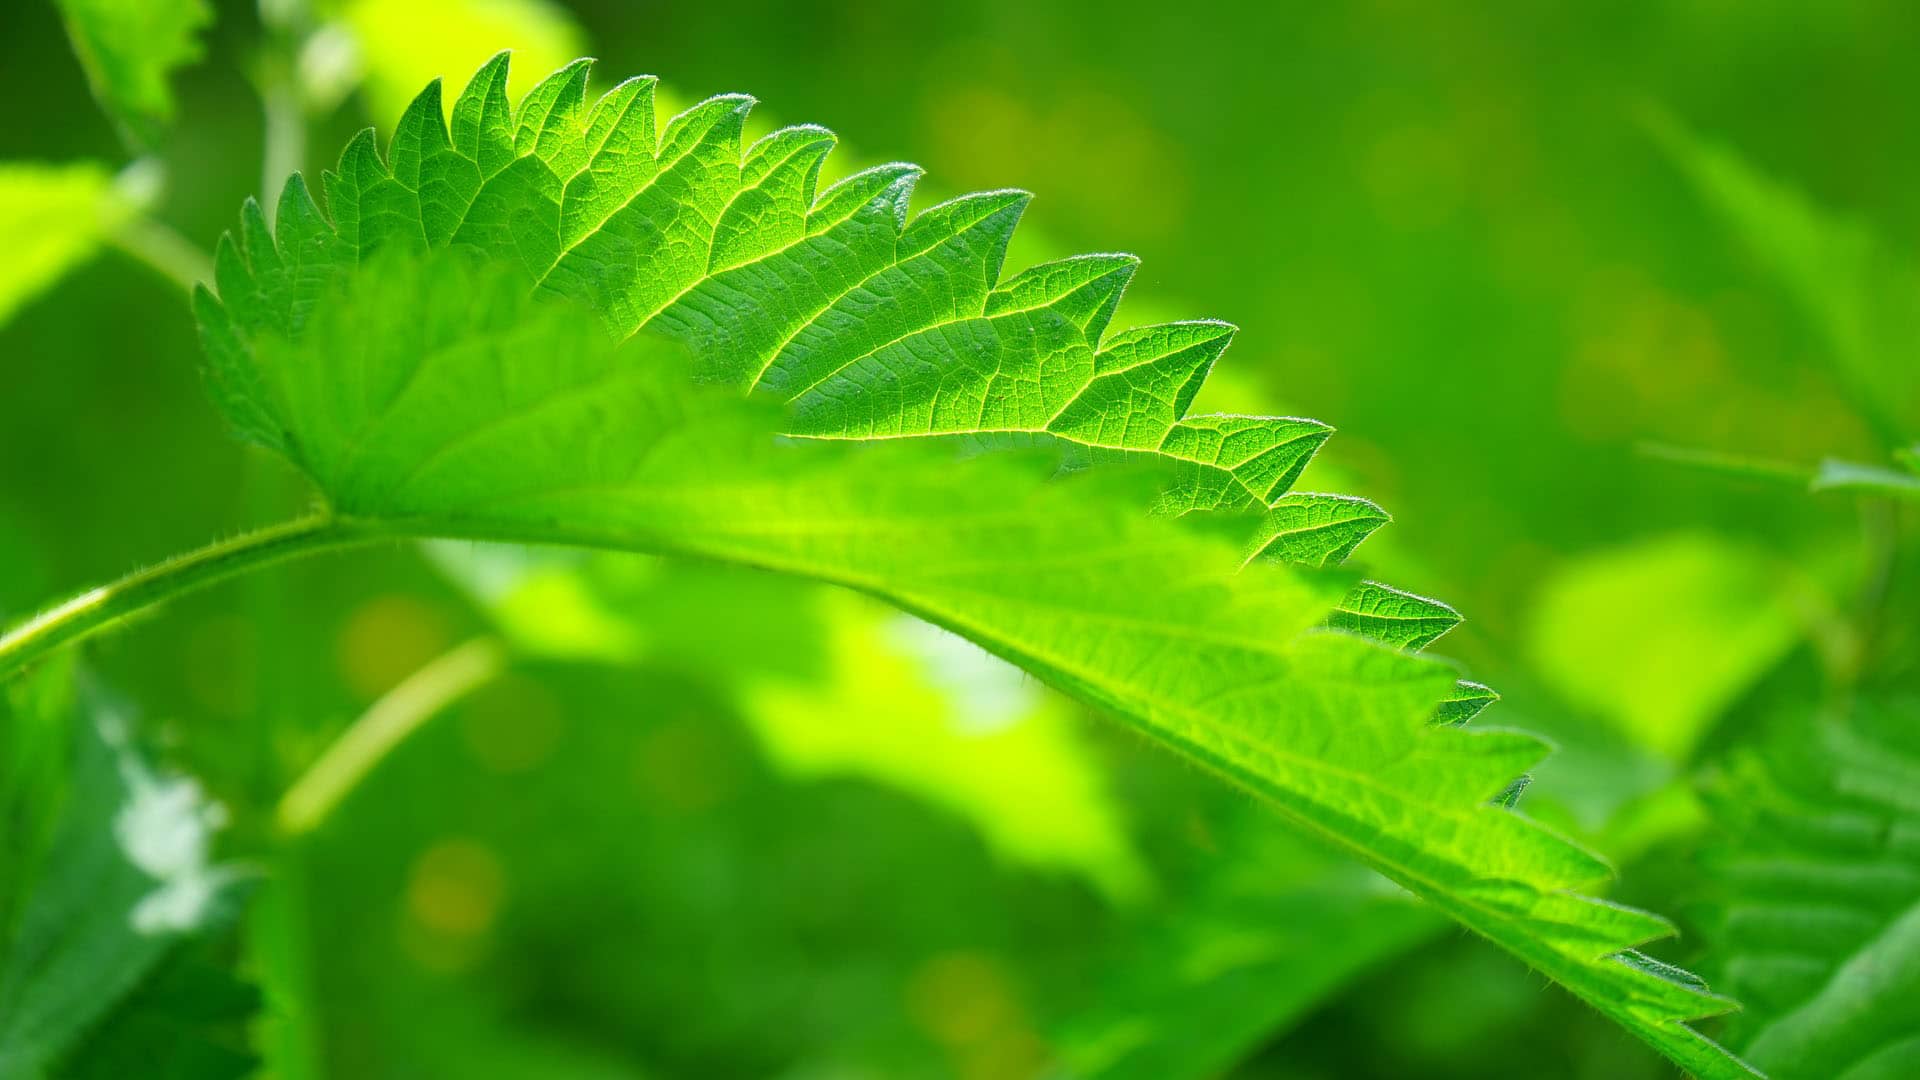 Nettle Leaf (Urtica Dioica)